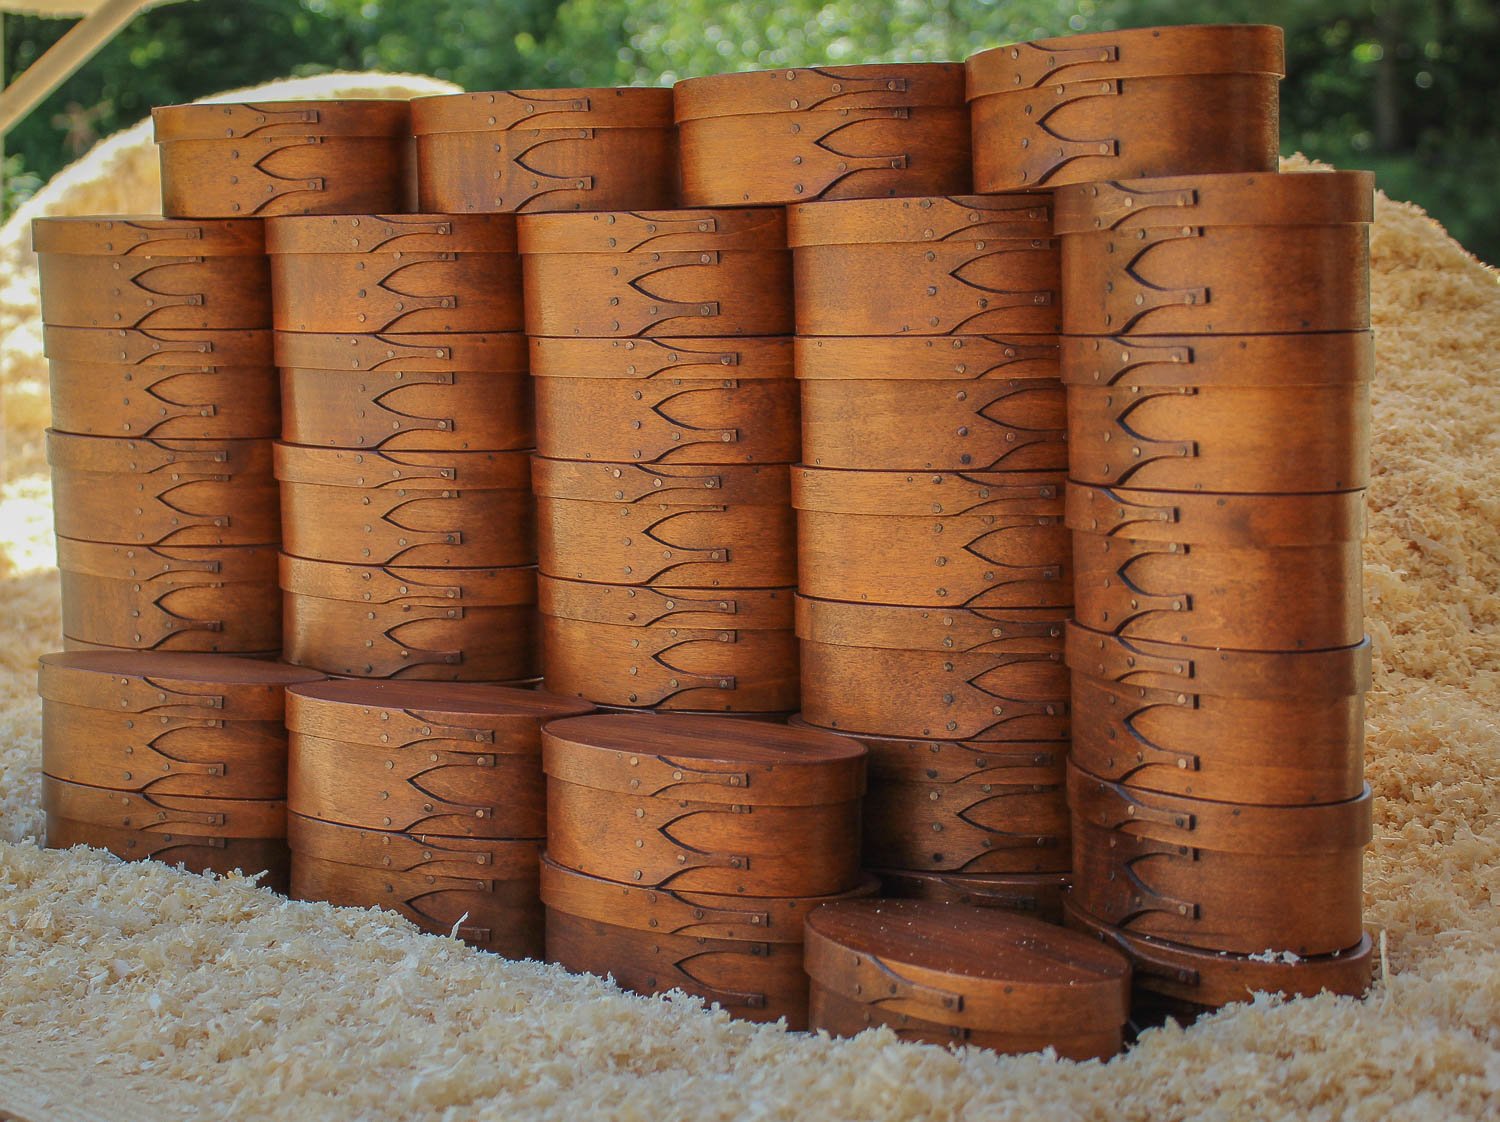 Shaker Oval Boxes, Size #1, LeHays Shaker Boxes, Handcrafted in Maine.  Antiqued Natural Finish